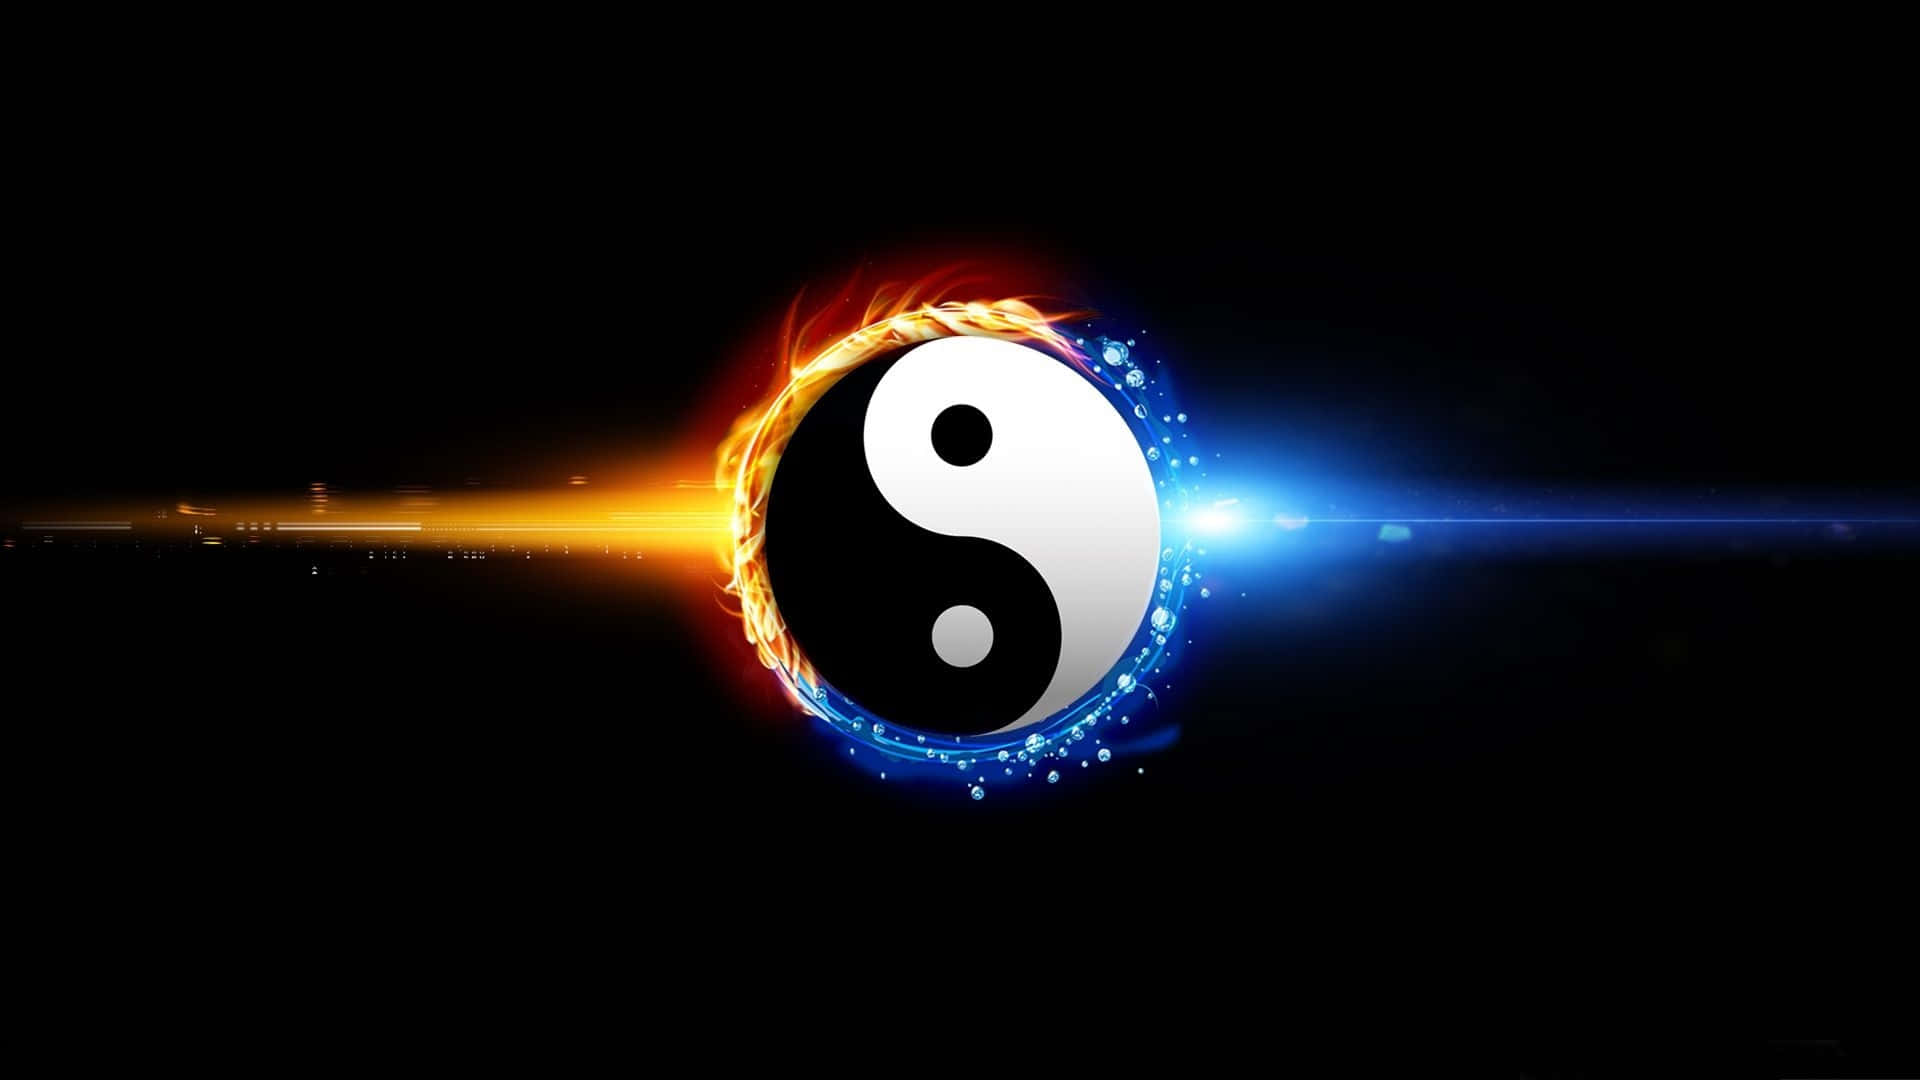 Yin Yang 4k With Fire And Water